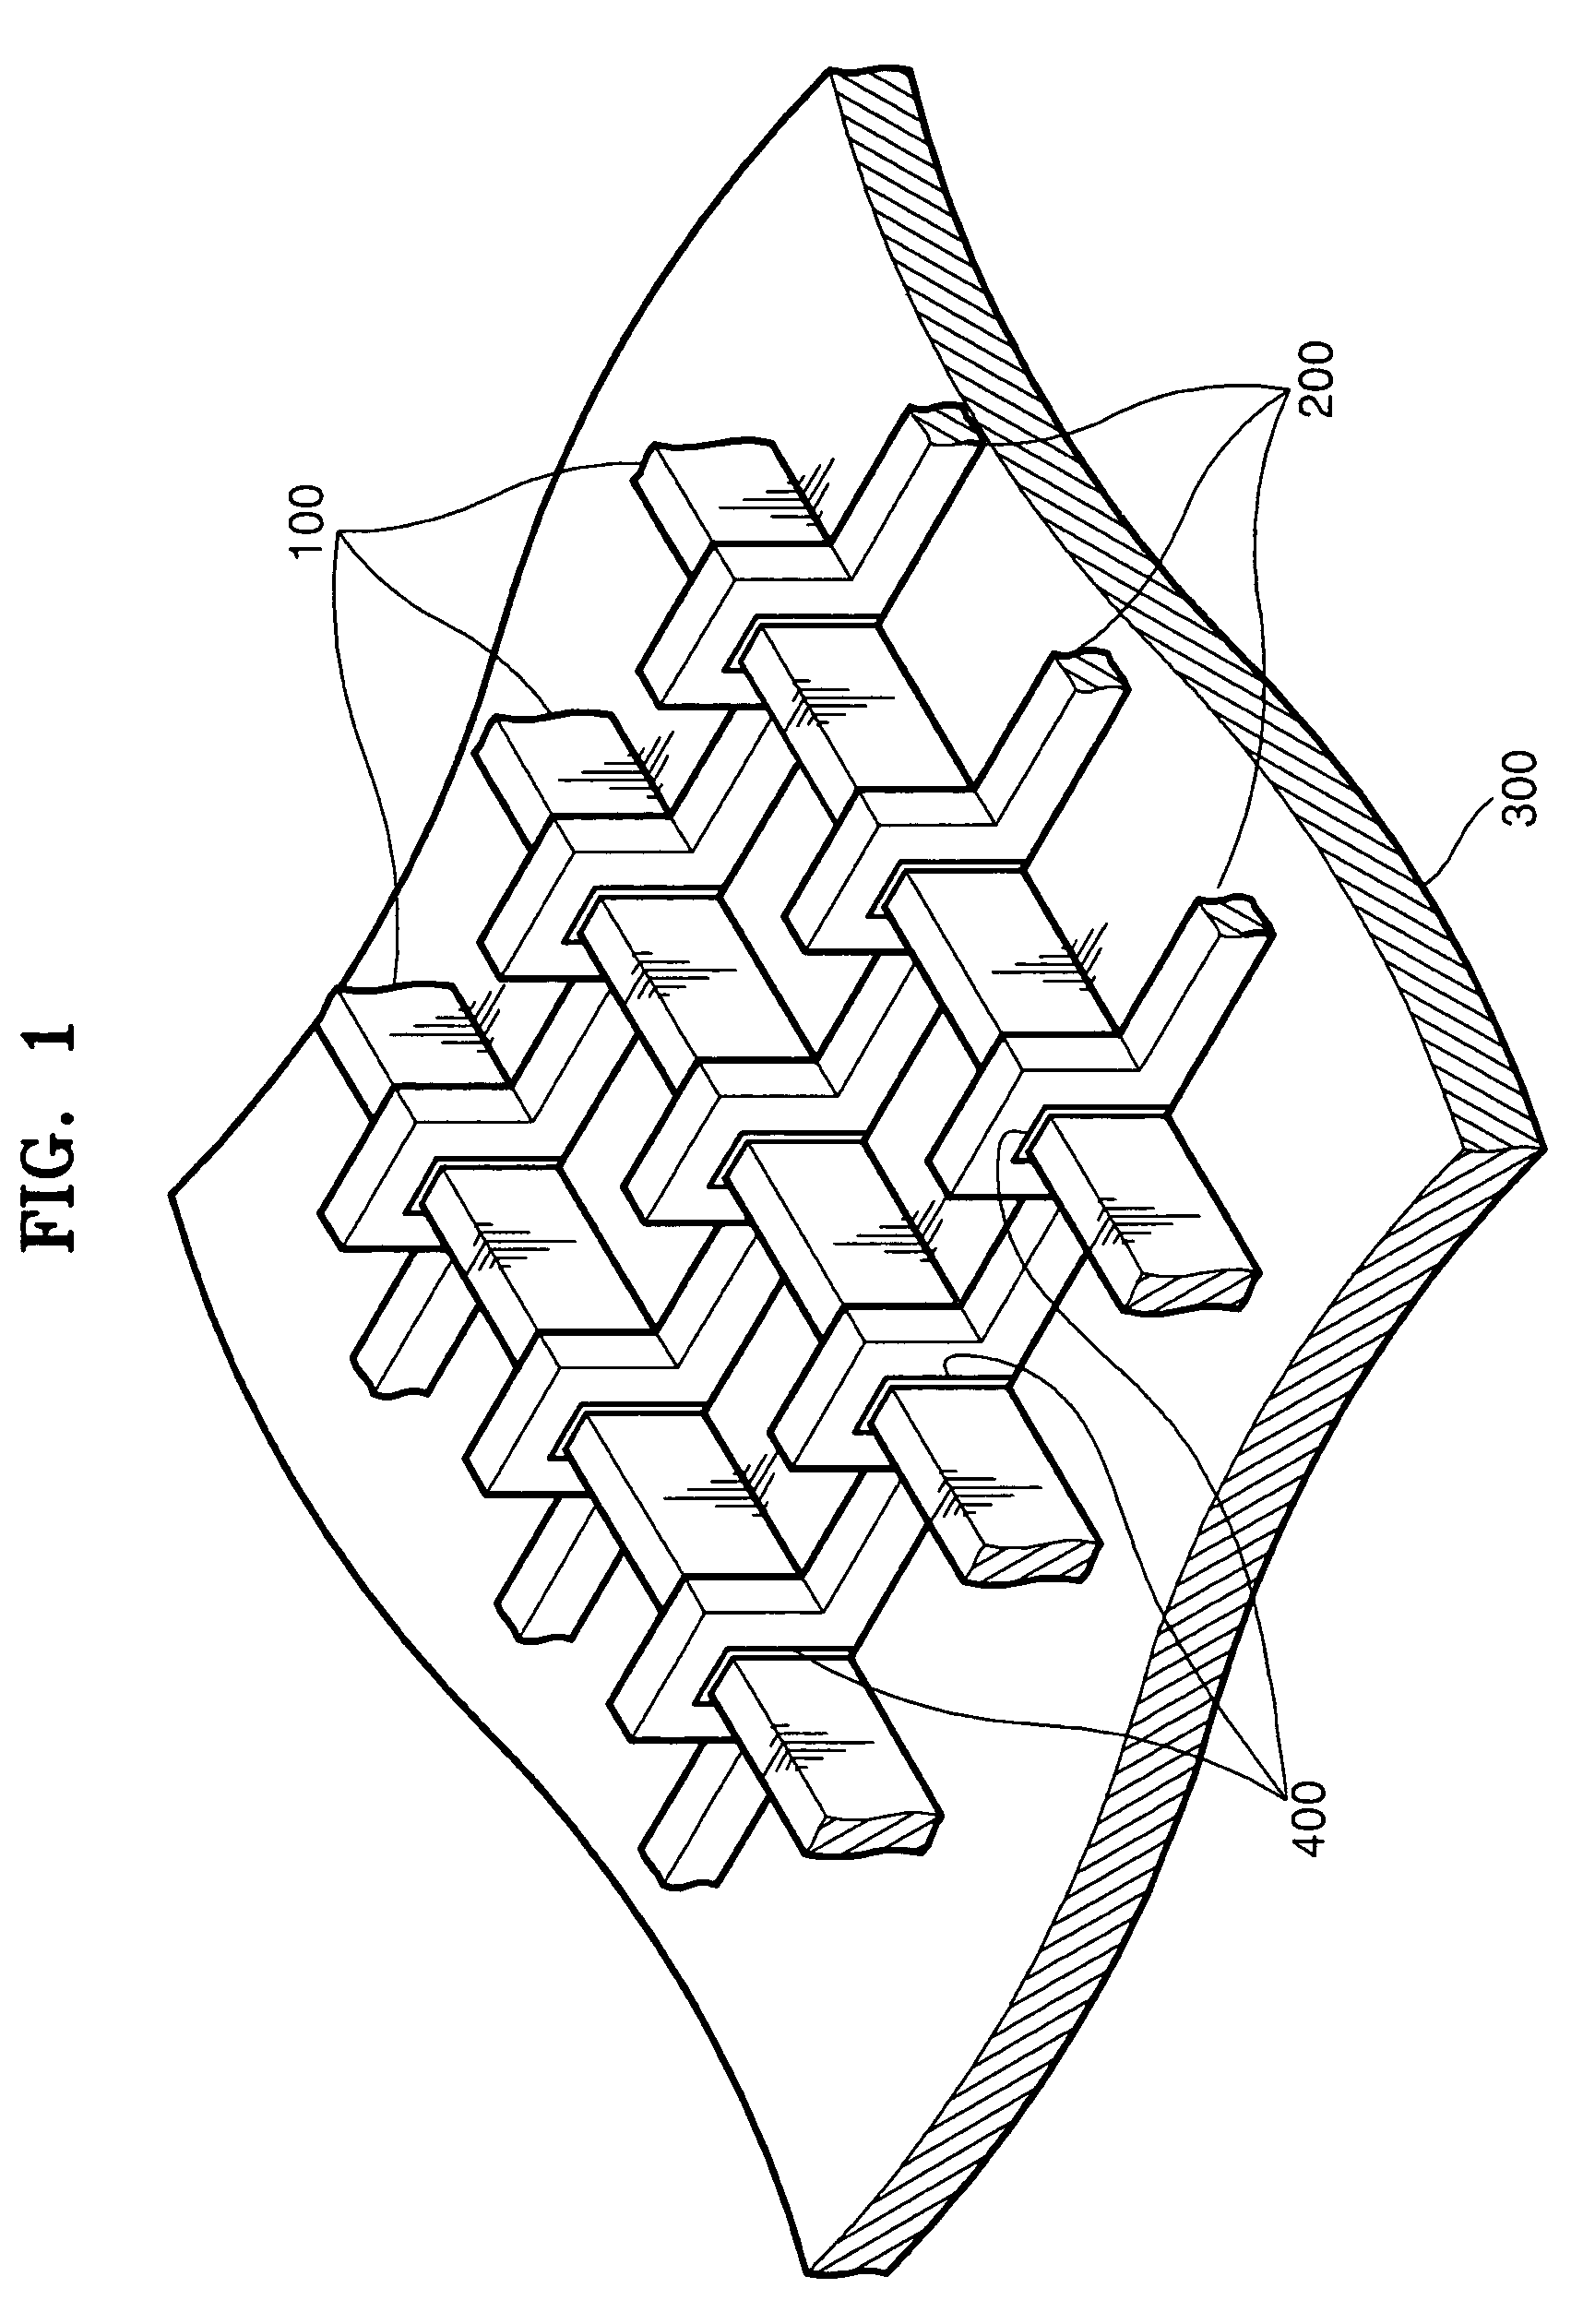 Magnetic memory device with moving magnetic domain walls